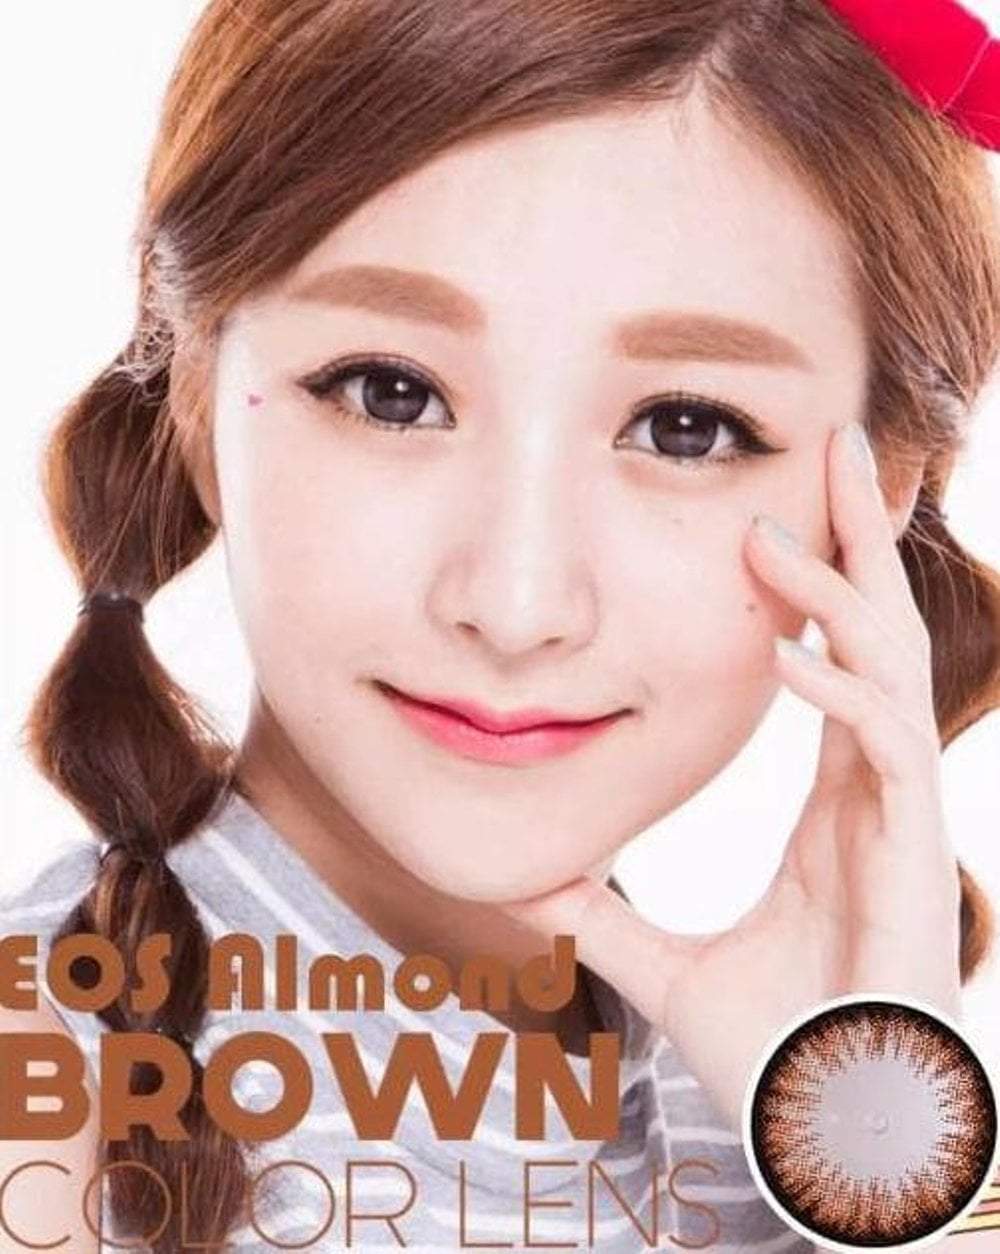 COLORED CONTACTS EOS ALMOND BROWN - Lens Beauty Queen